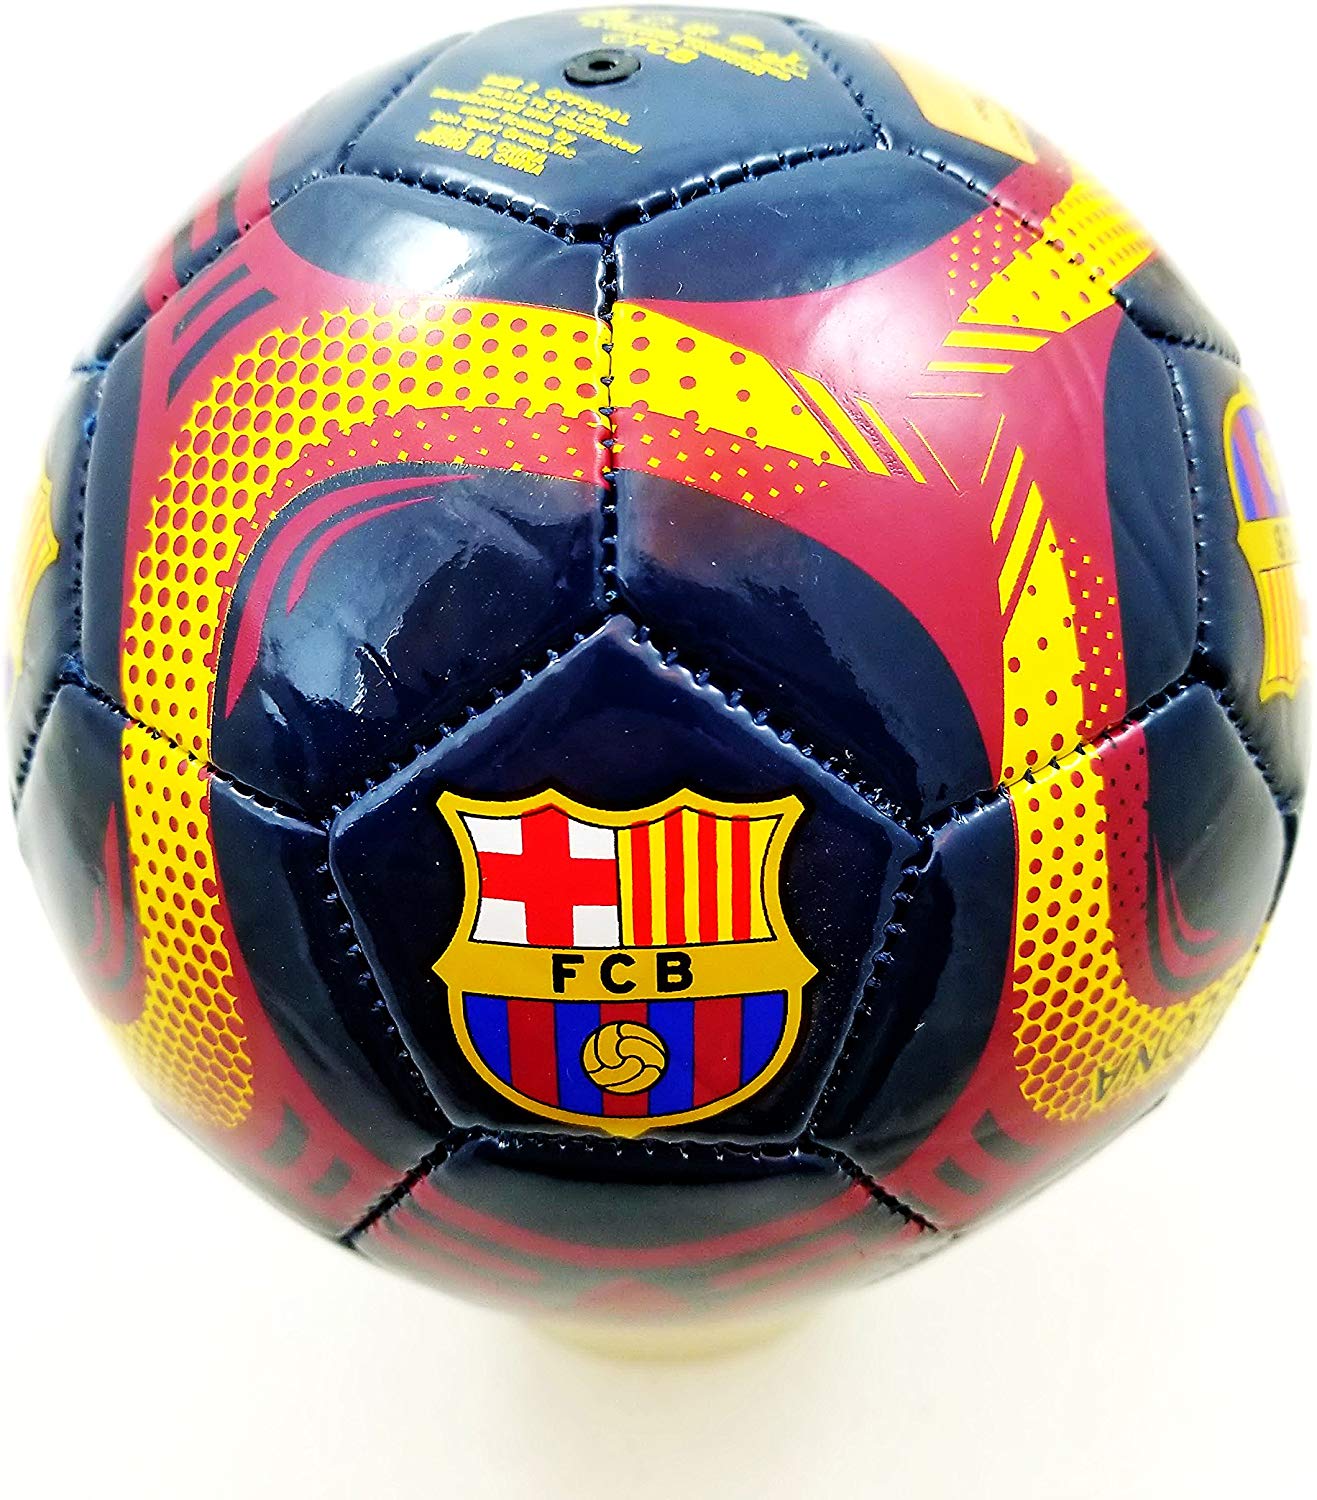 Icon Sports FC Barcelona Soccer Ball Officially Licensed Ball Size 2 02-5 - image 1 of 2